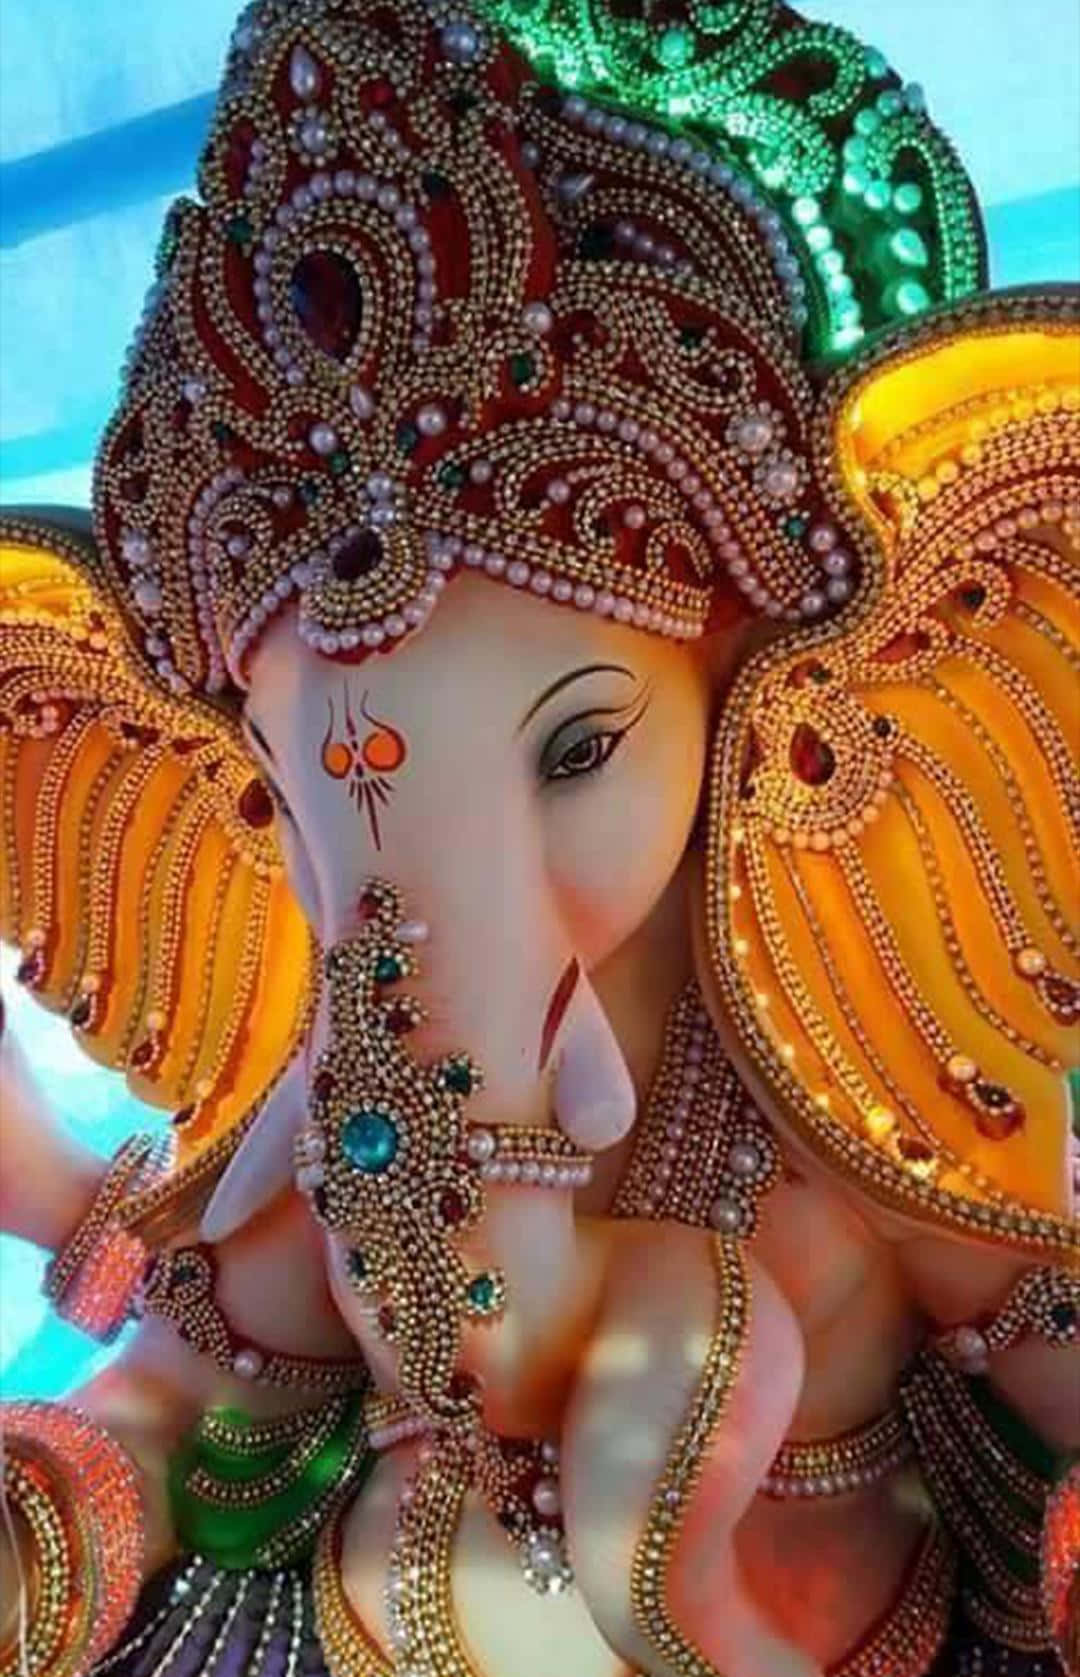 Lord Ganesha, the Remover of Obstacles